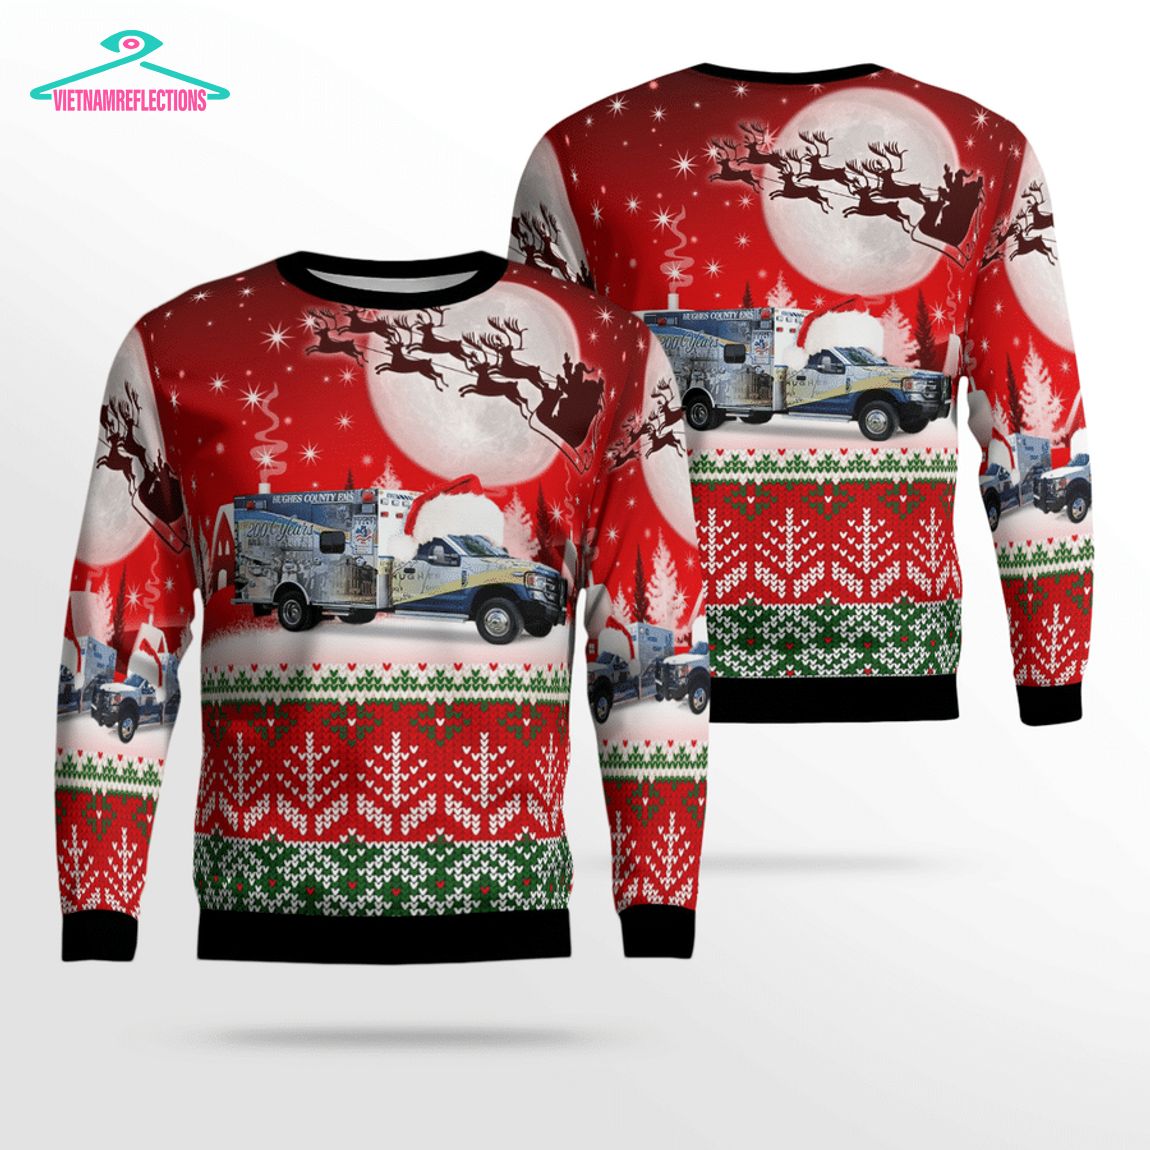 Hughes County EMS Ver 8 3D Christmas Sweater - Your beauty is irresistible.